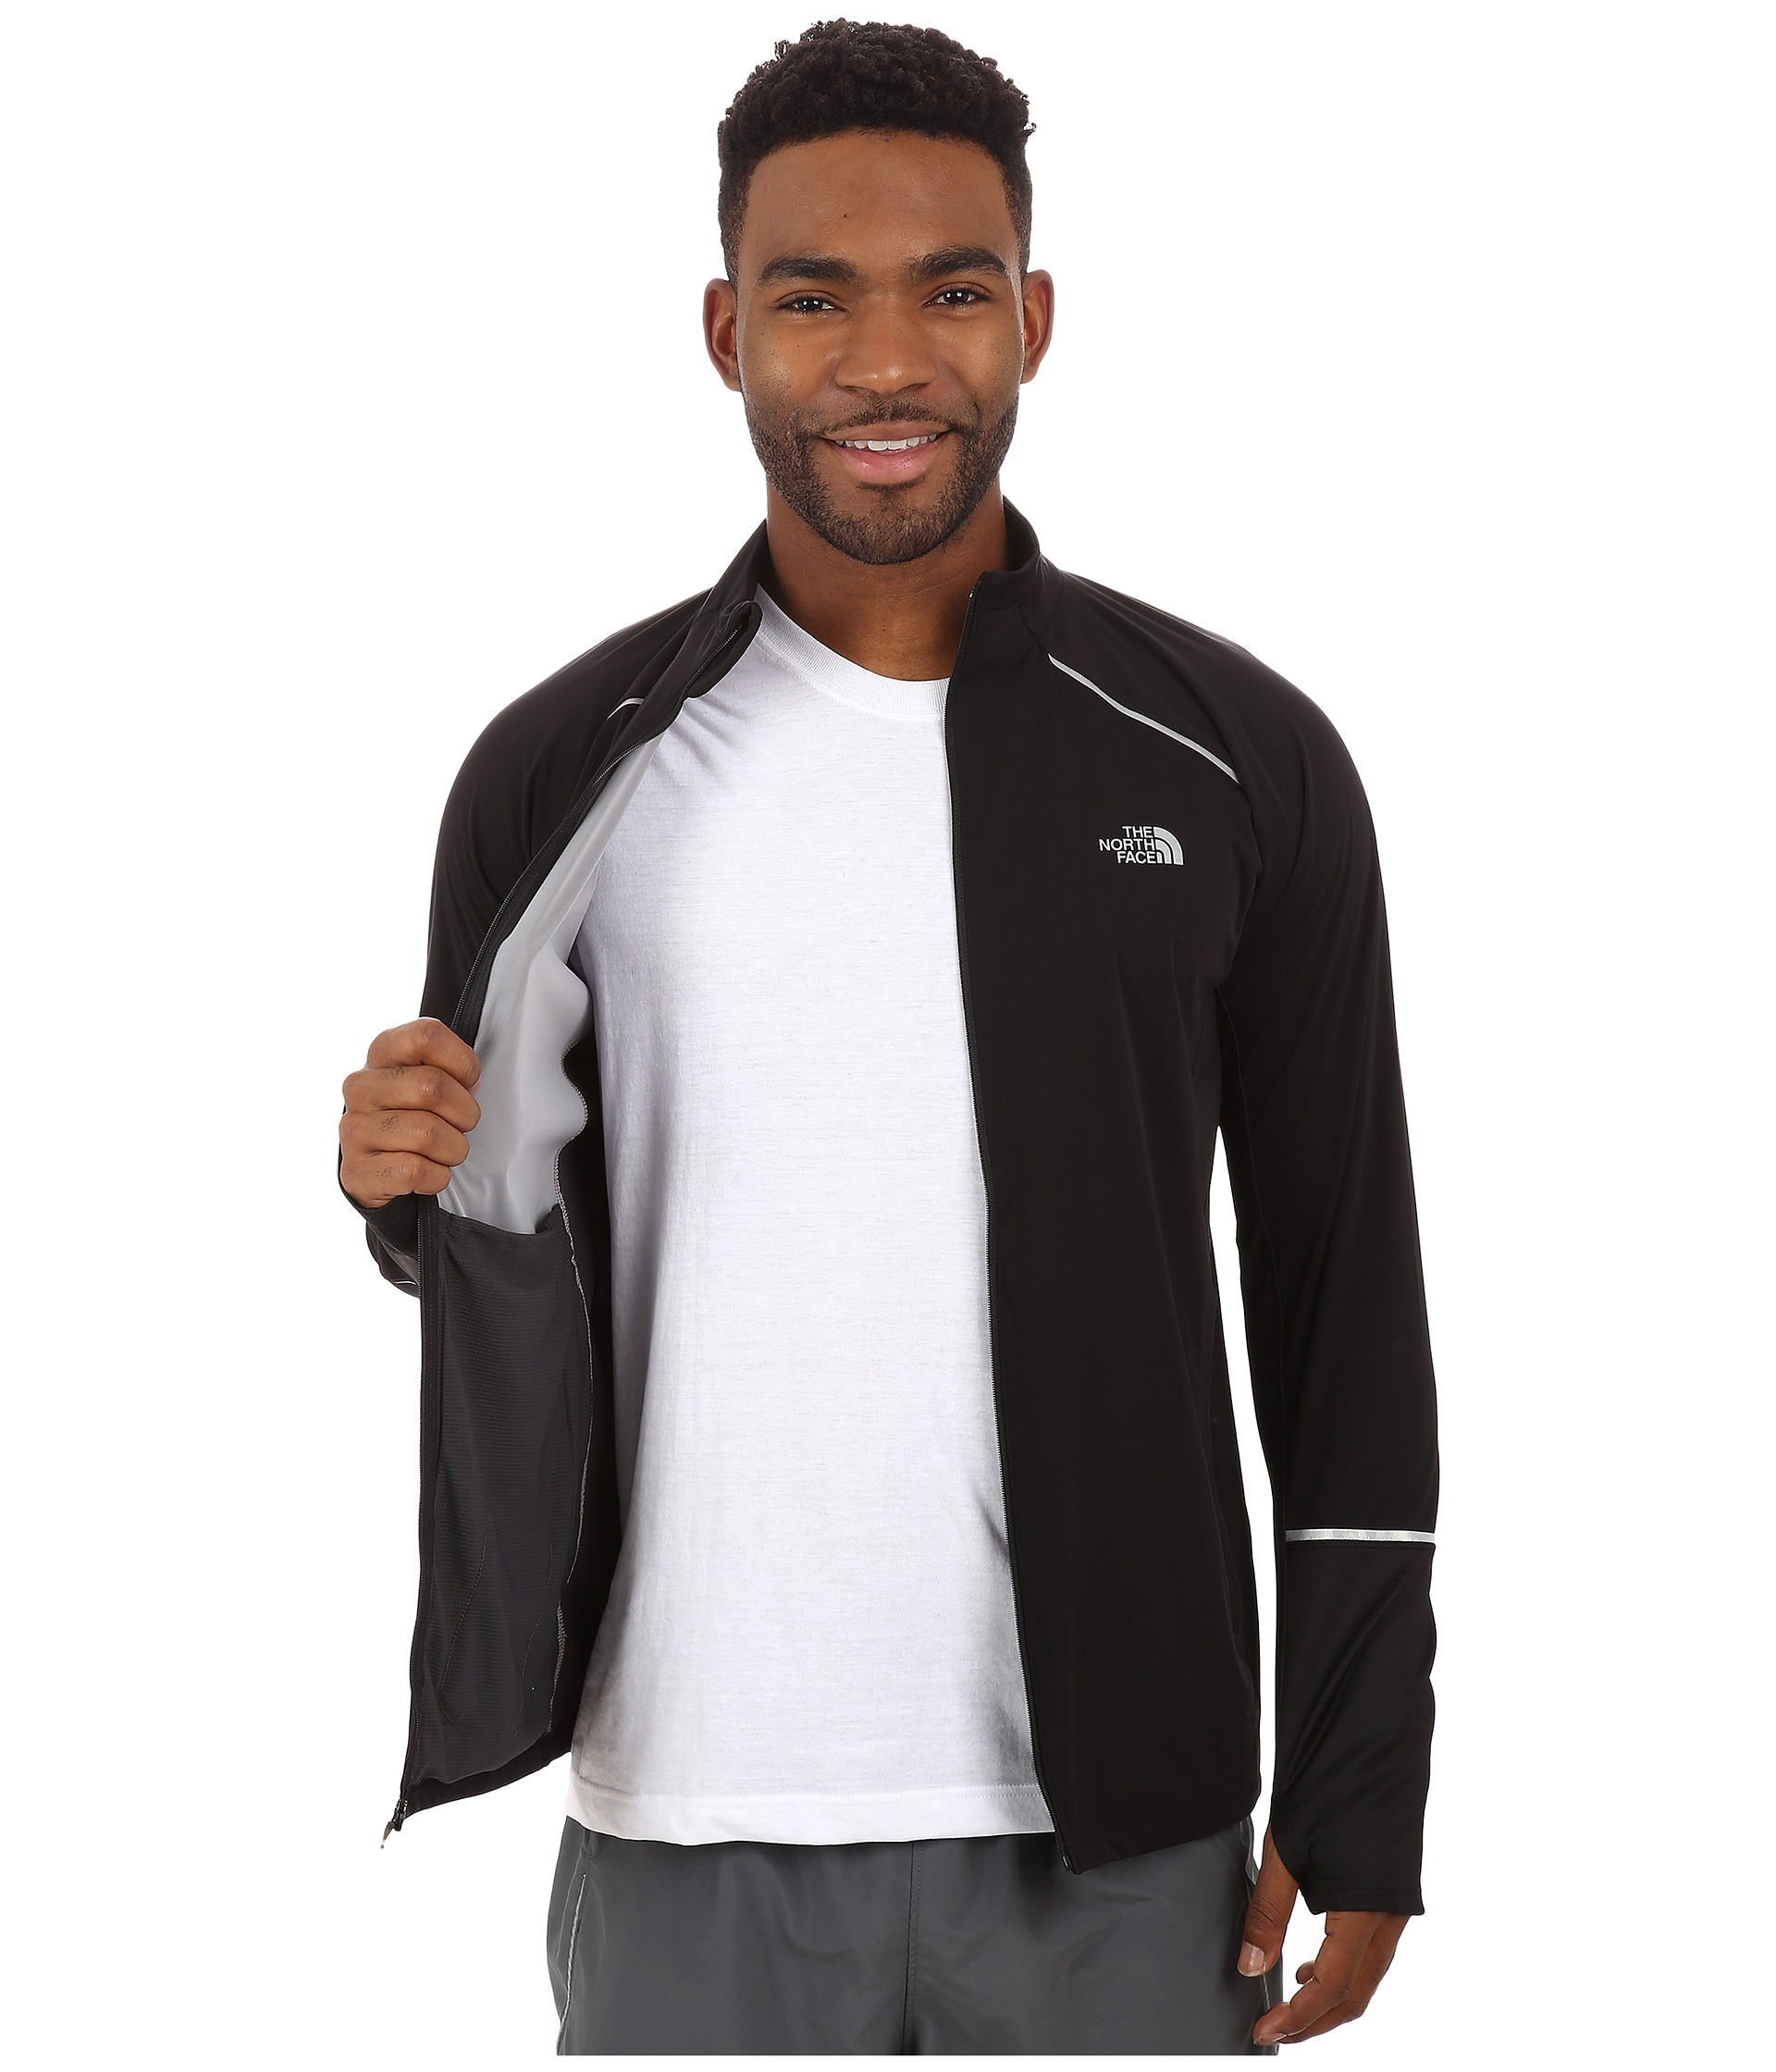 north face isolite jacket